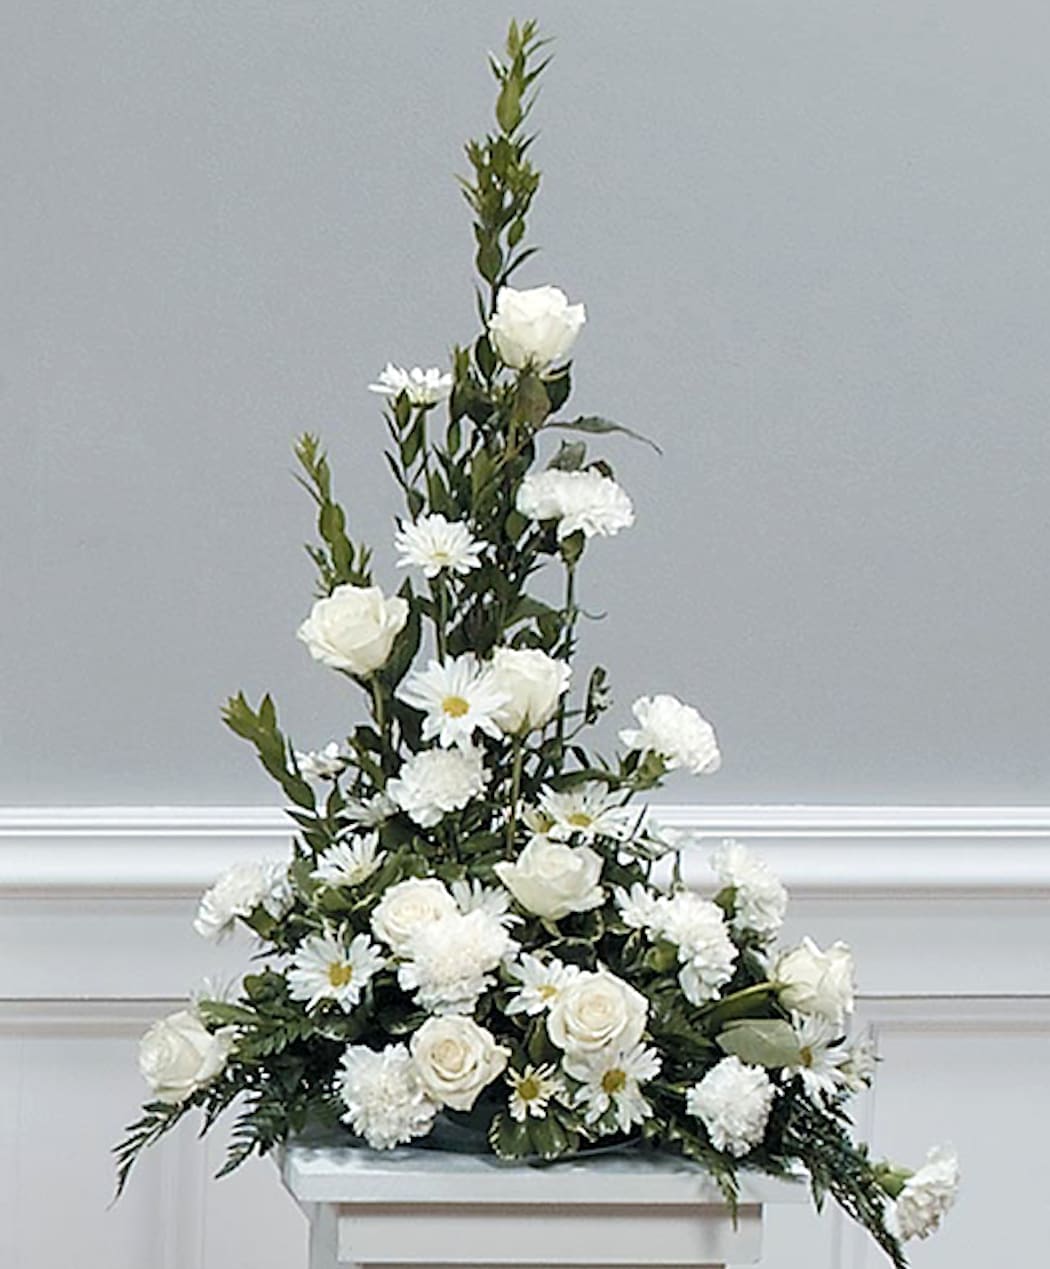 Rising Glory - Stunningly arrange pedestal arrangement with all whites. Includes roses, carnations and mums representing peace, tranquility and love. 